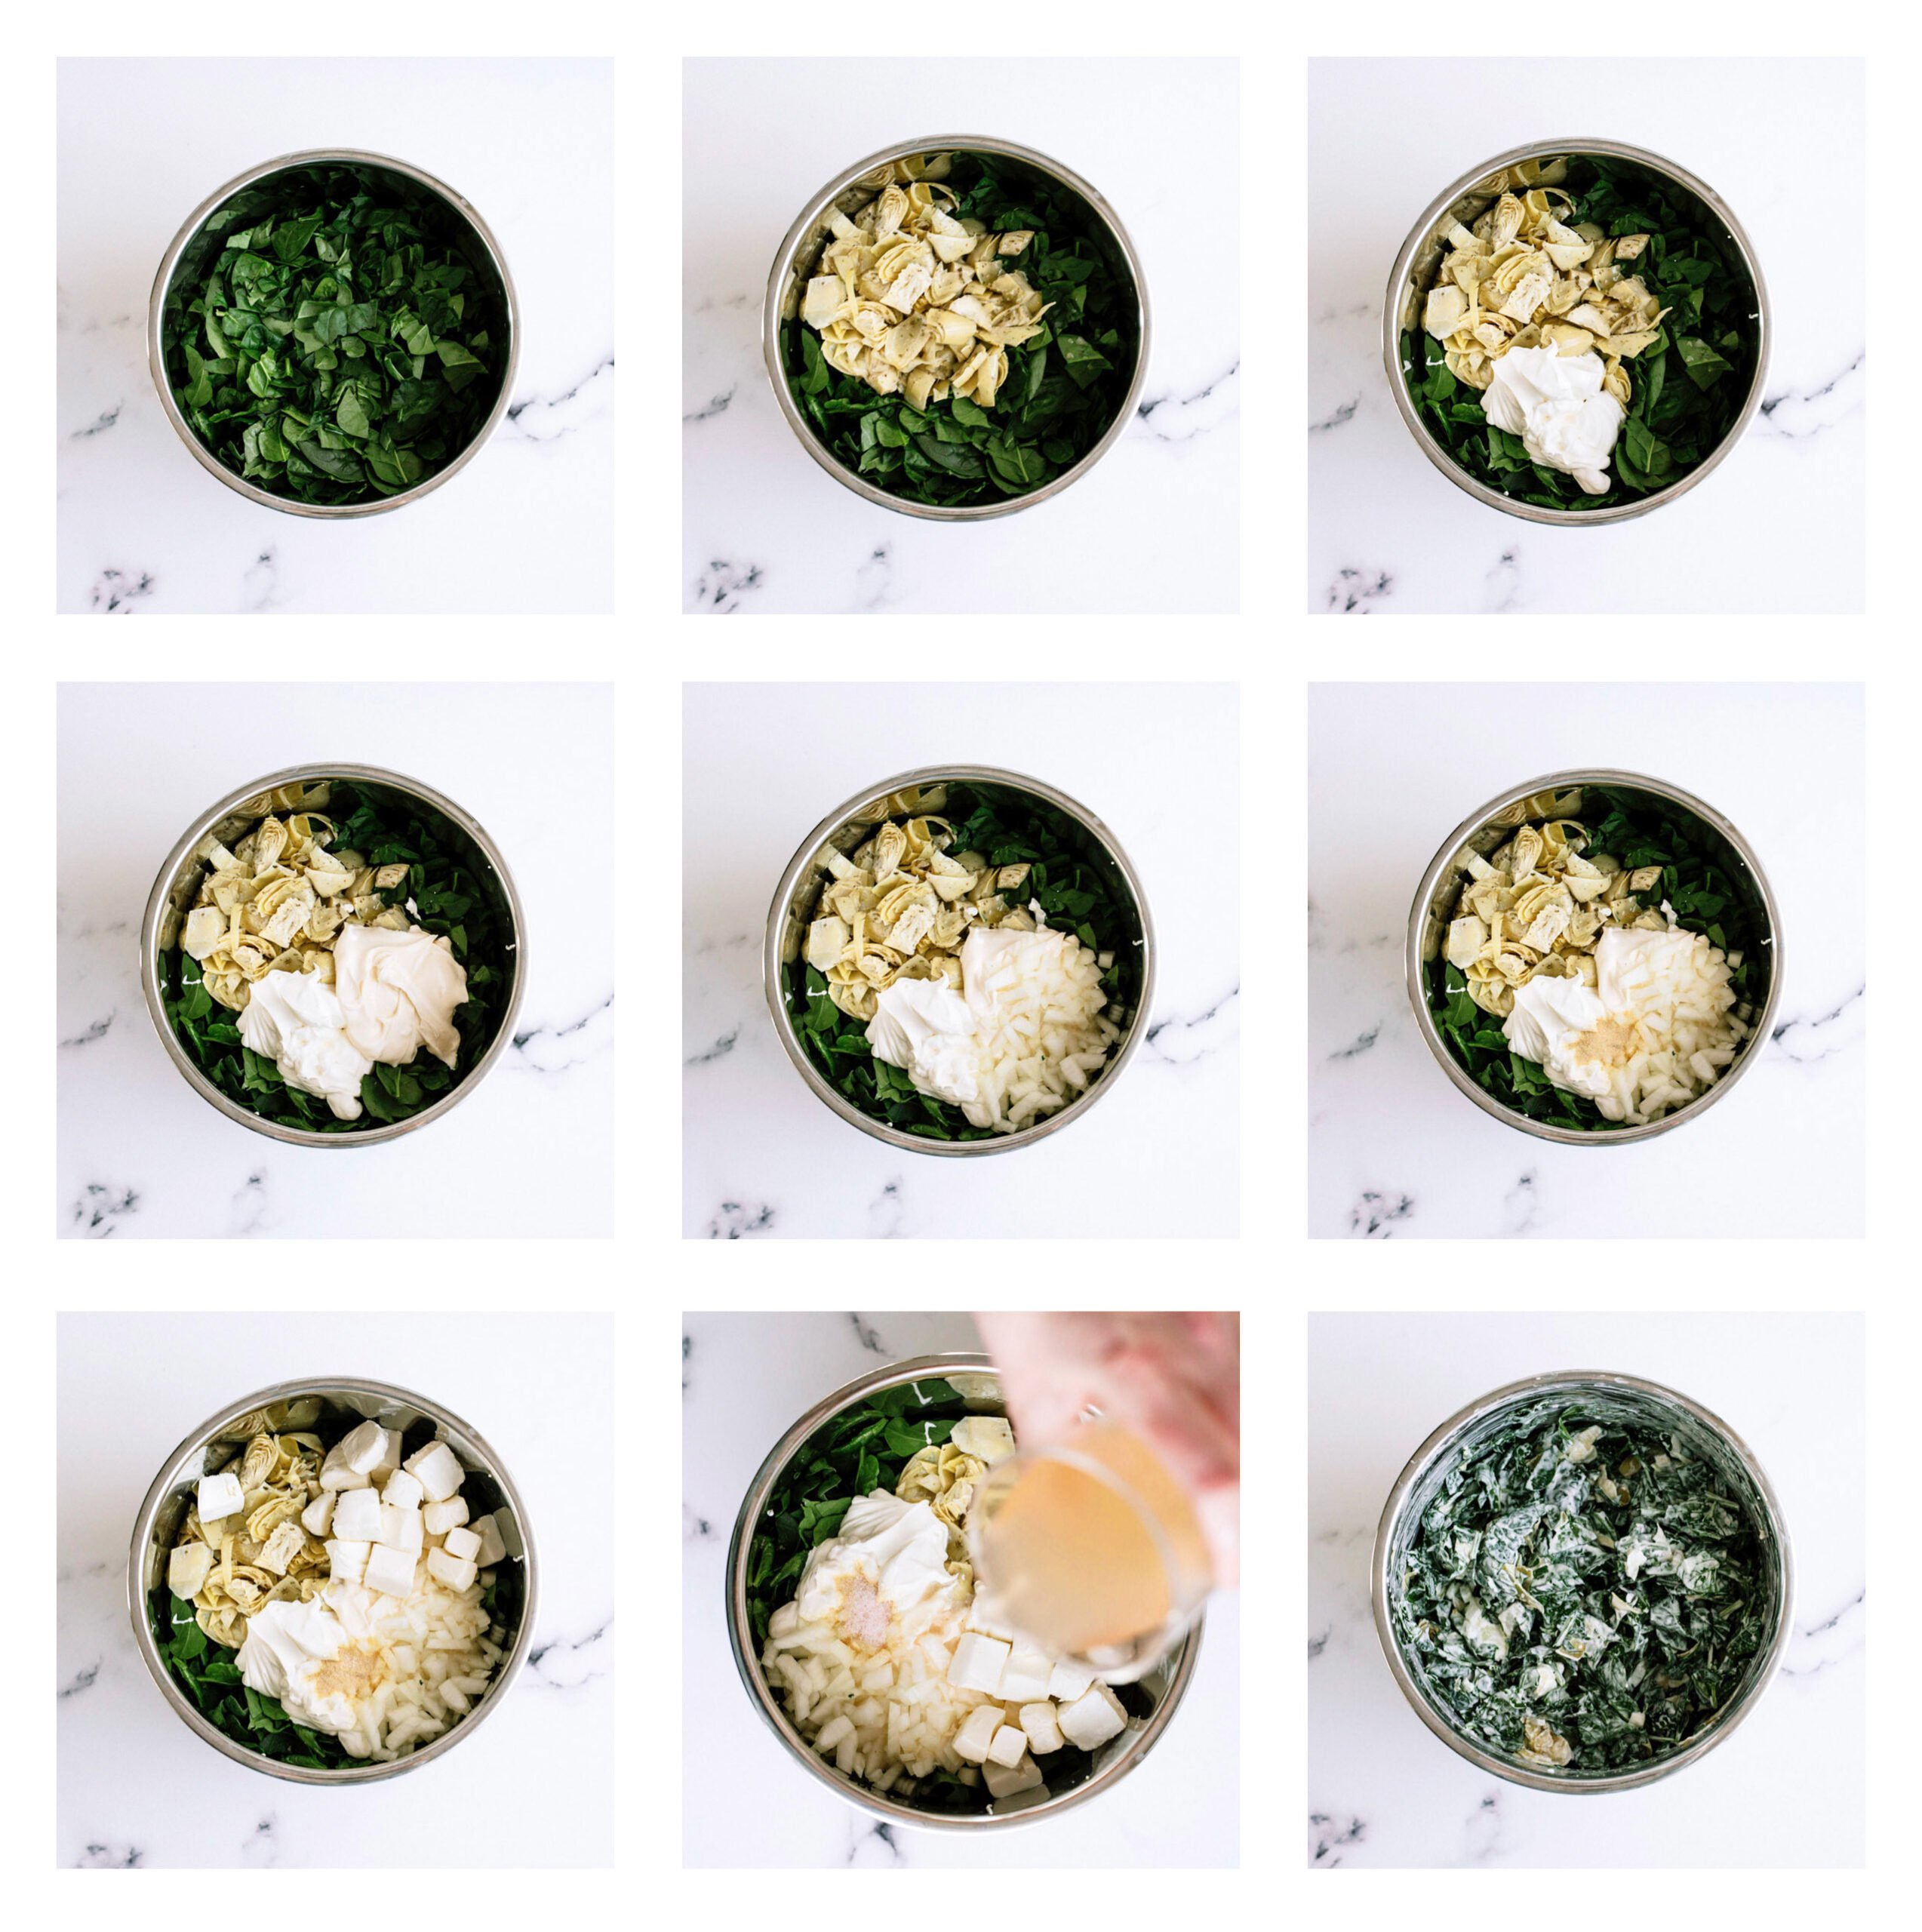 Step by Step images of how to make Spinach Artichoke Dip